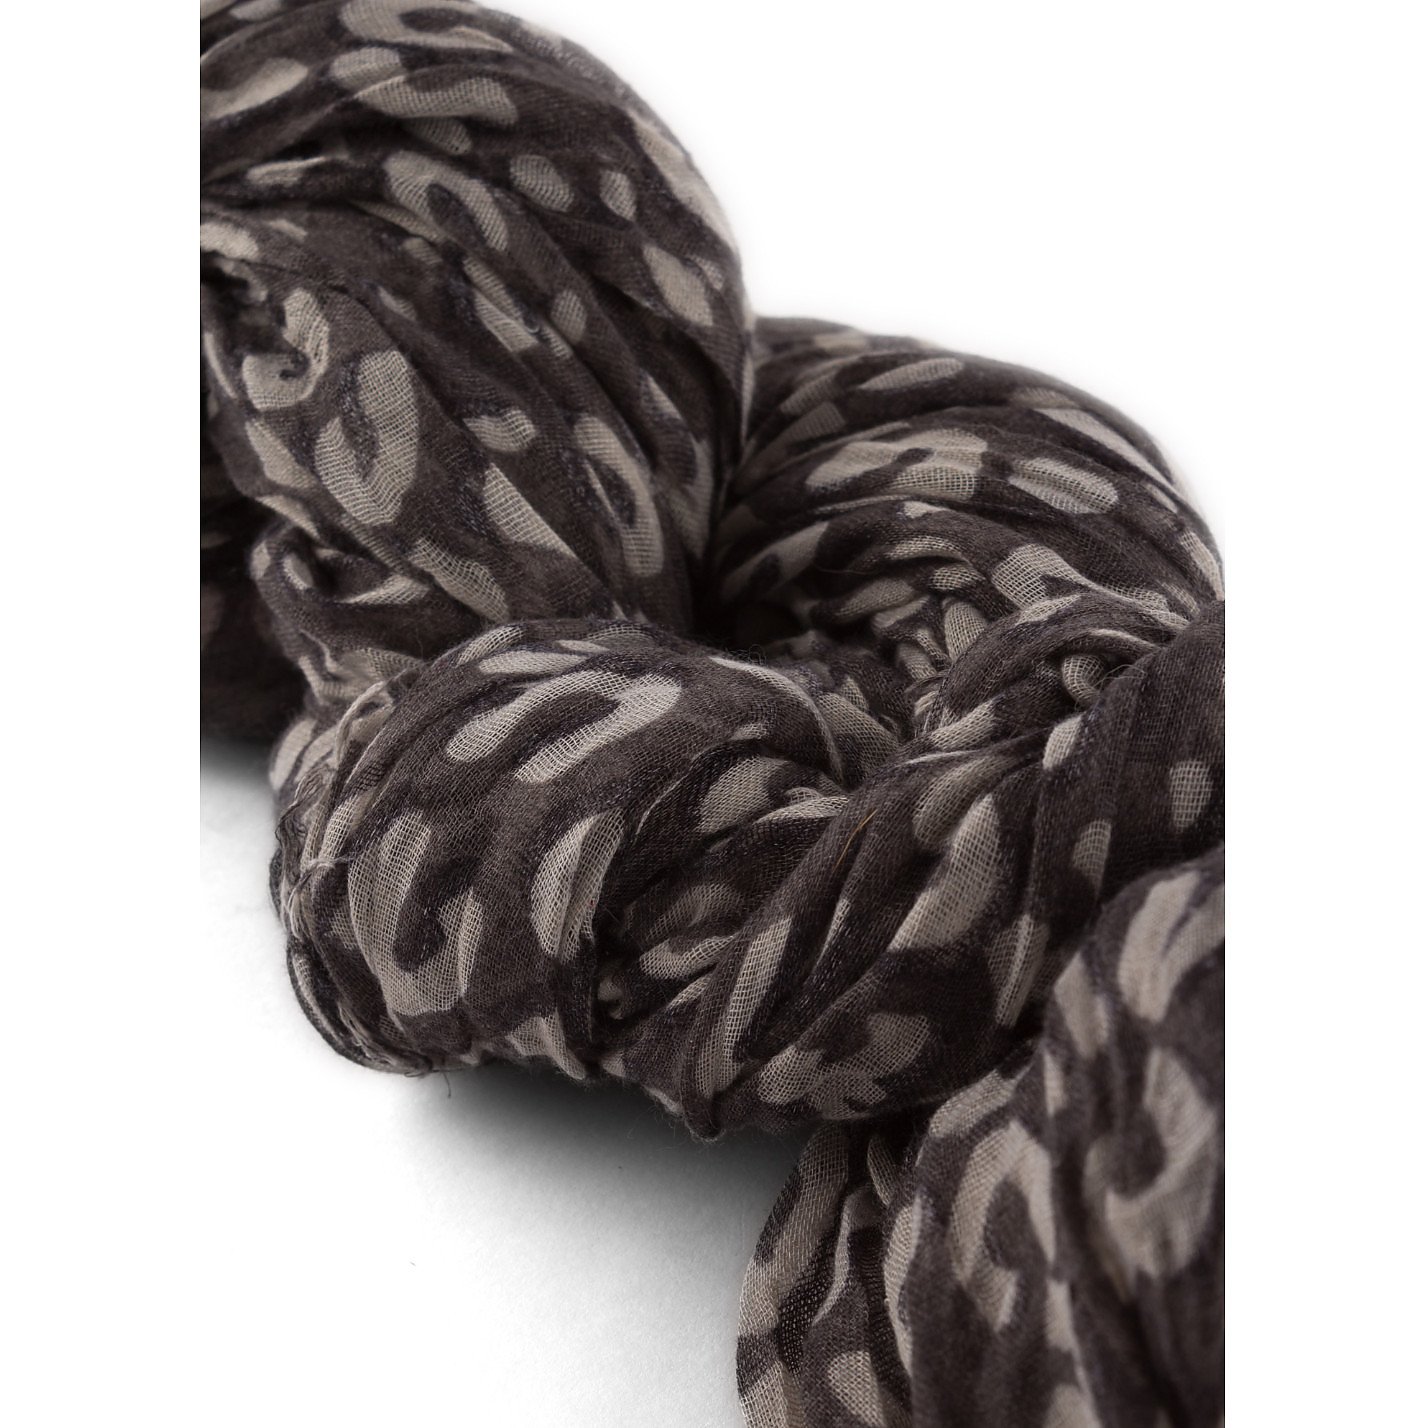 Rent or Buy Louis Vuitton Large Animal Print Scarf from mediakits.theygsgroup.com